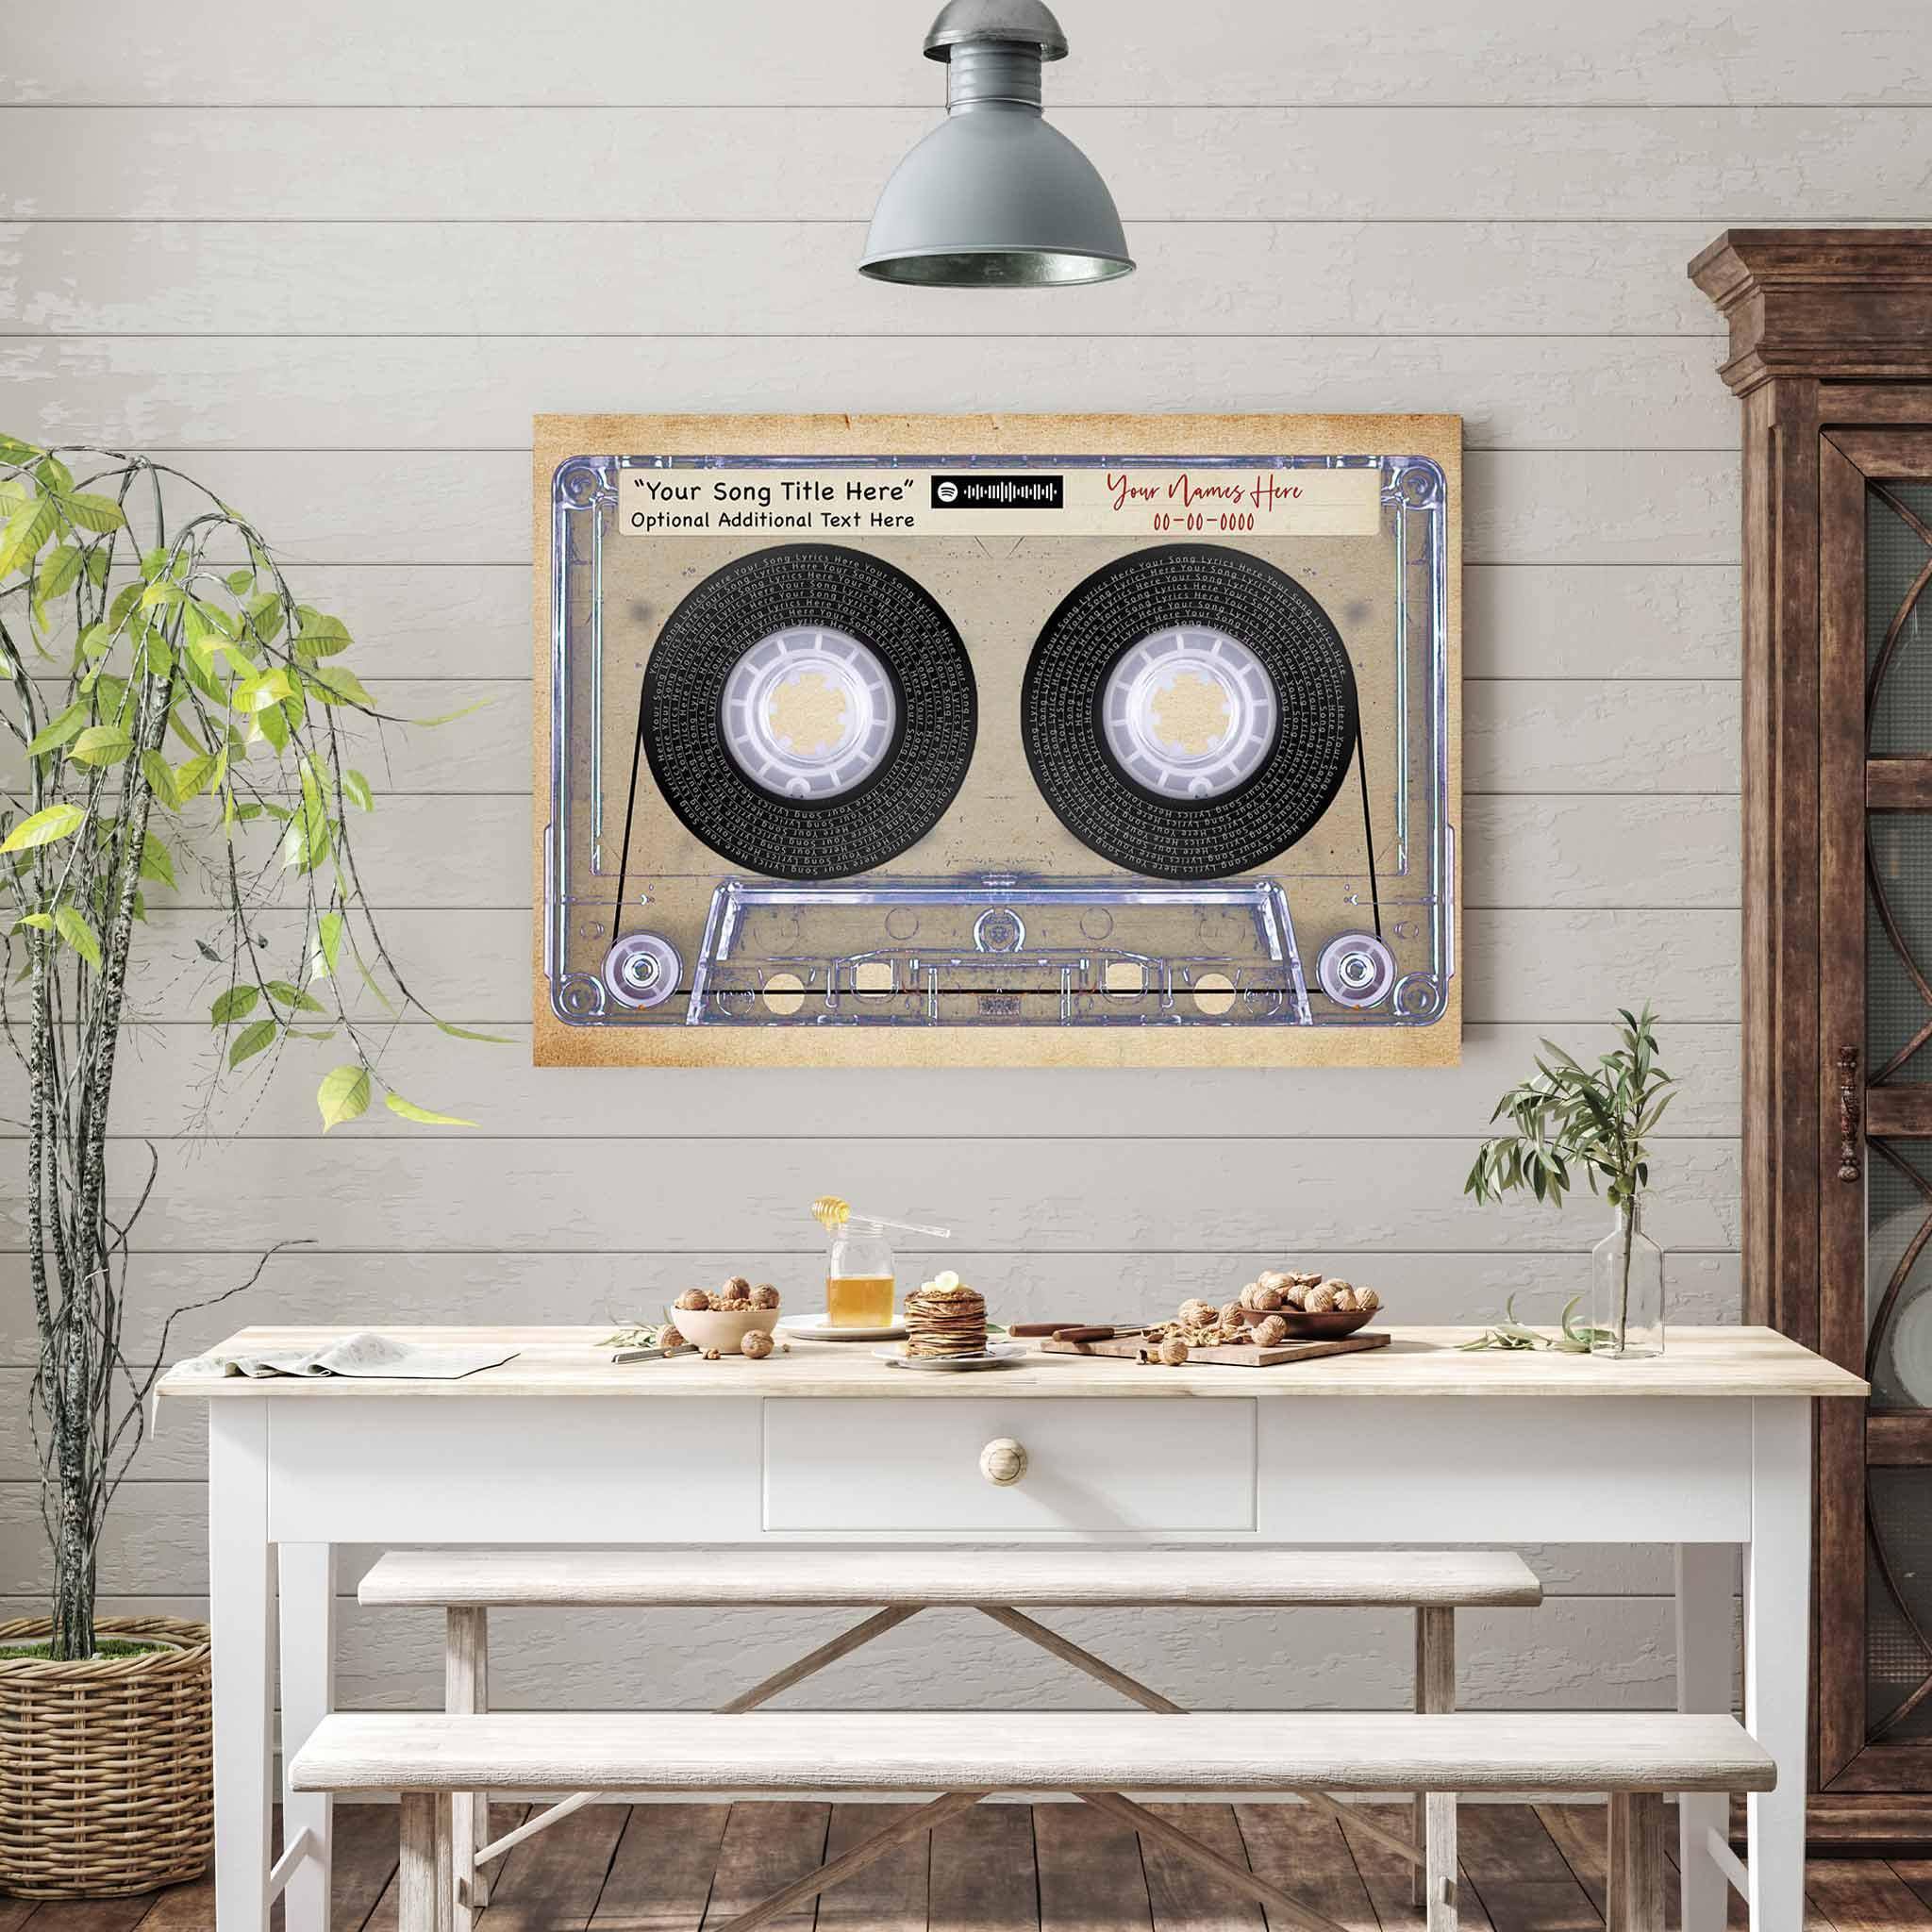 Music Song Lyrics Cassette Tape v1 Personalized Canvas Wall ArtCustomly Gifts